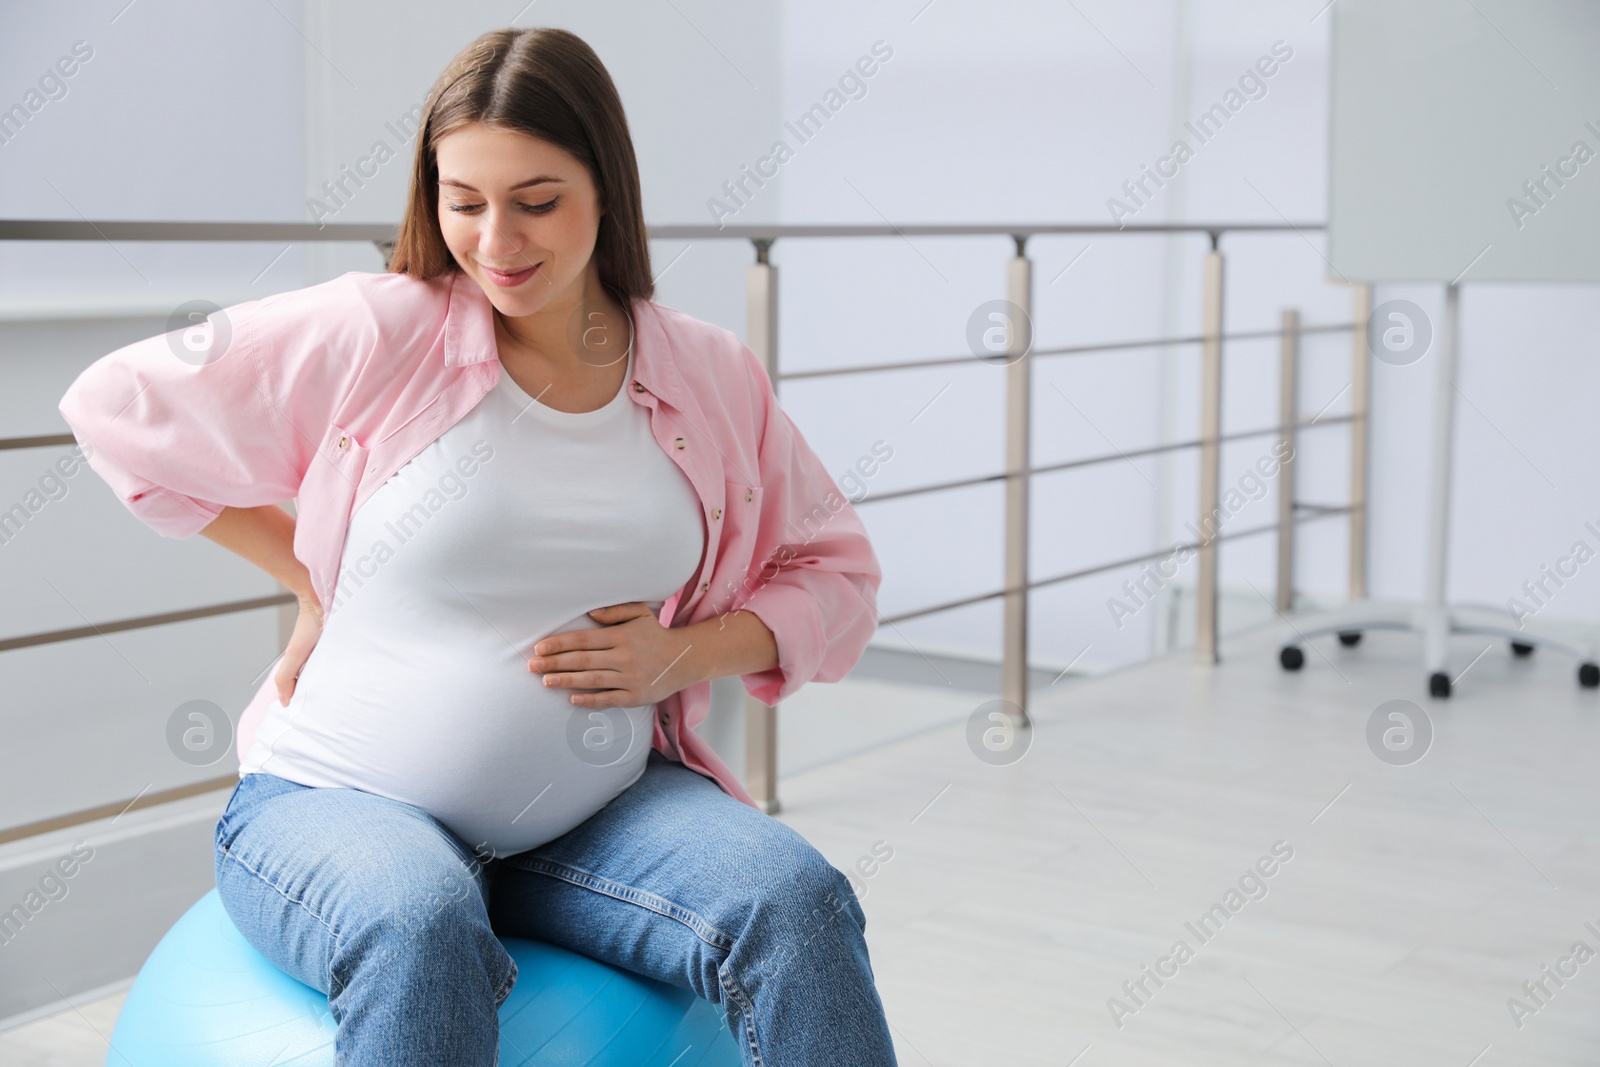 Photo of Pregnant woman sitting on fitball indoors. Space for text